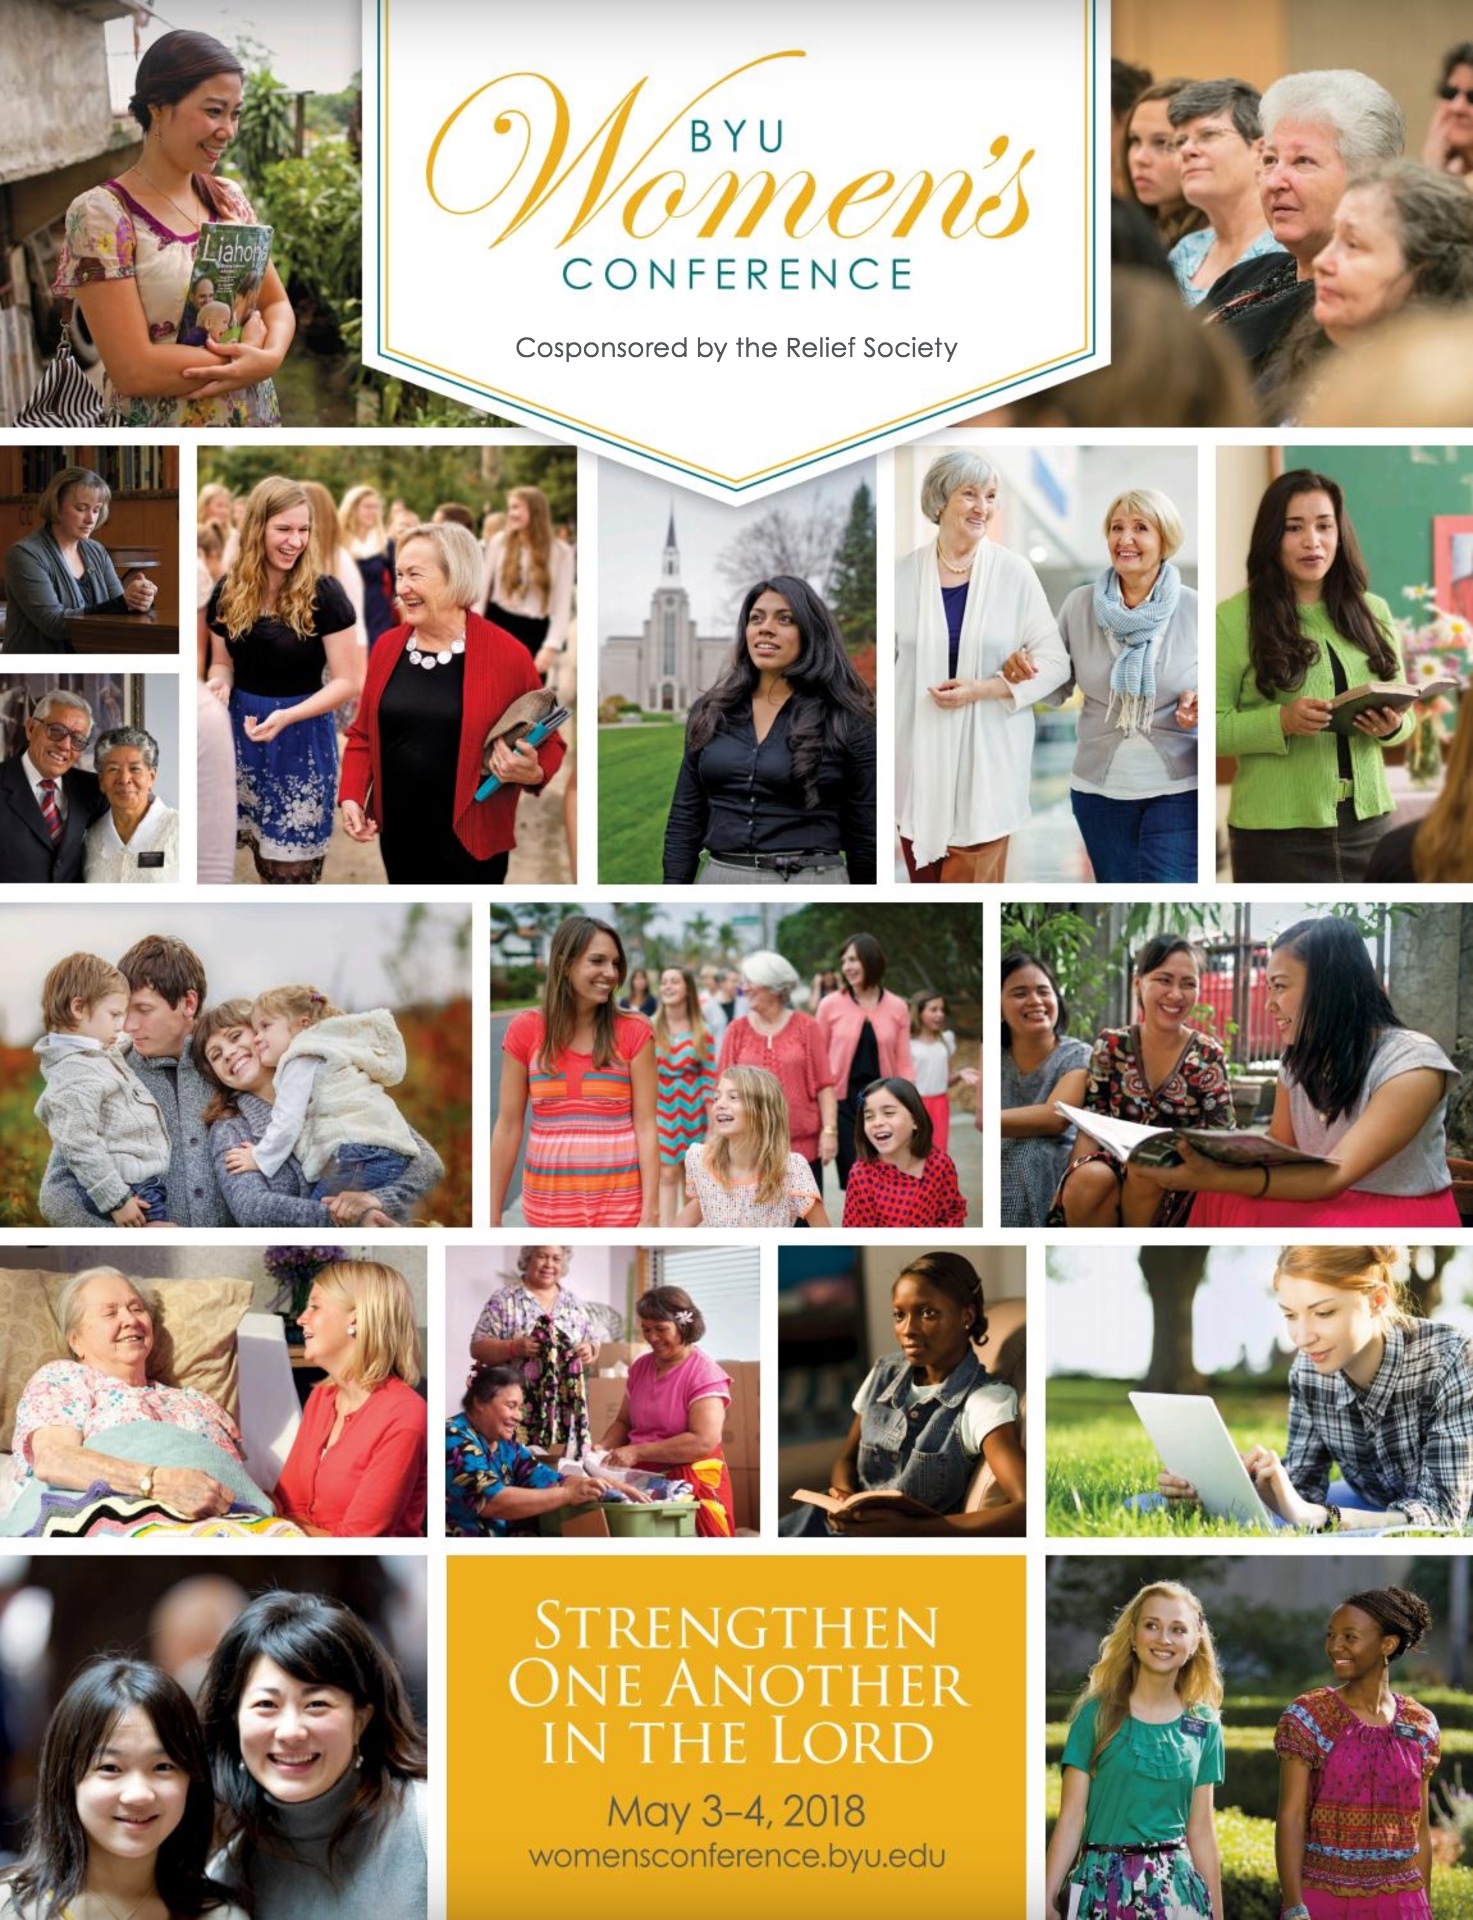 BYU Women’s Conference 2018